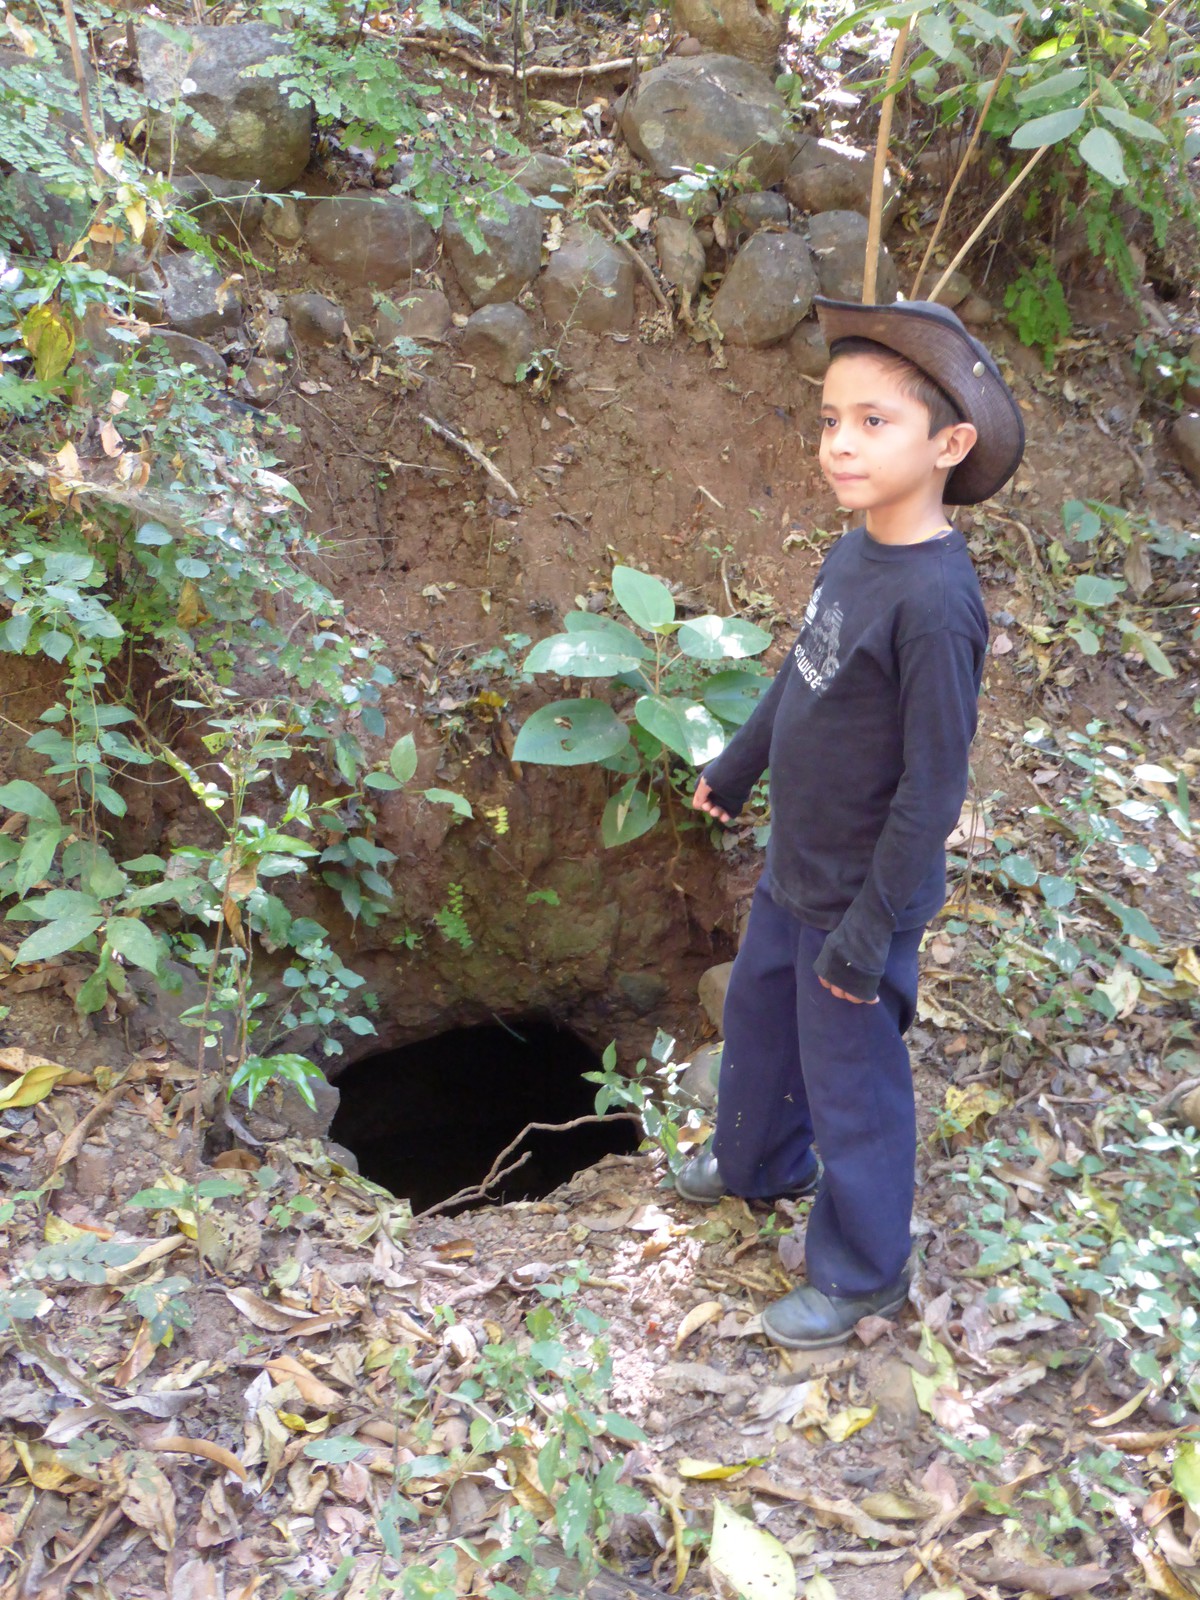 Nelsito pointing to a hole that locals used to shelter from the bombs